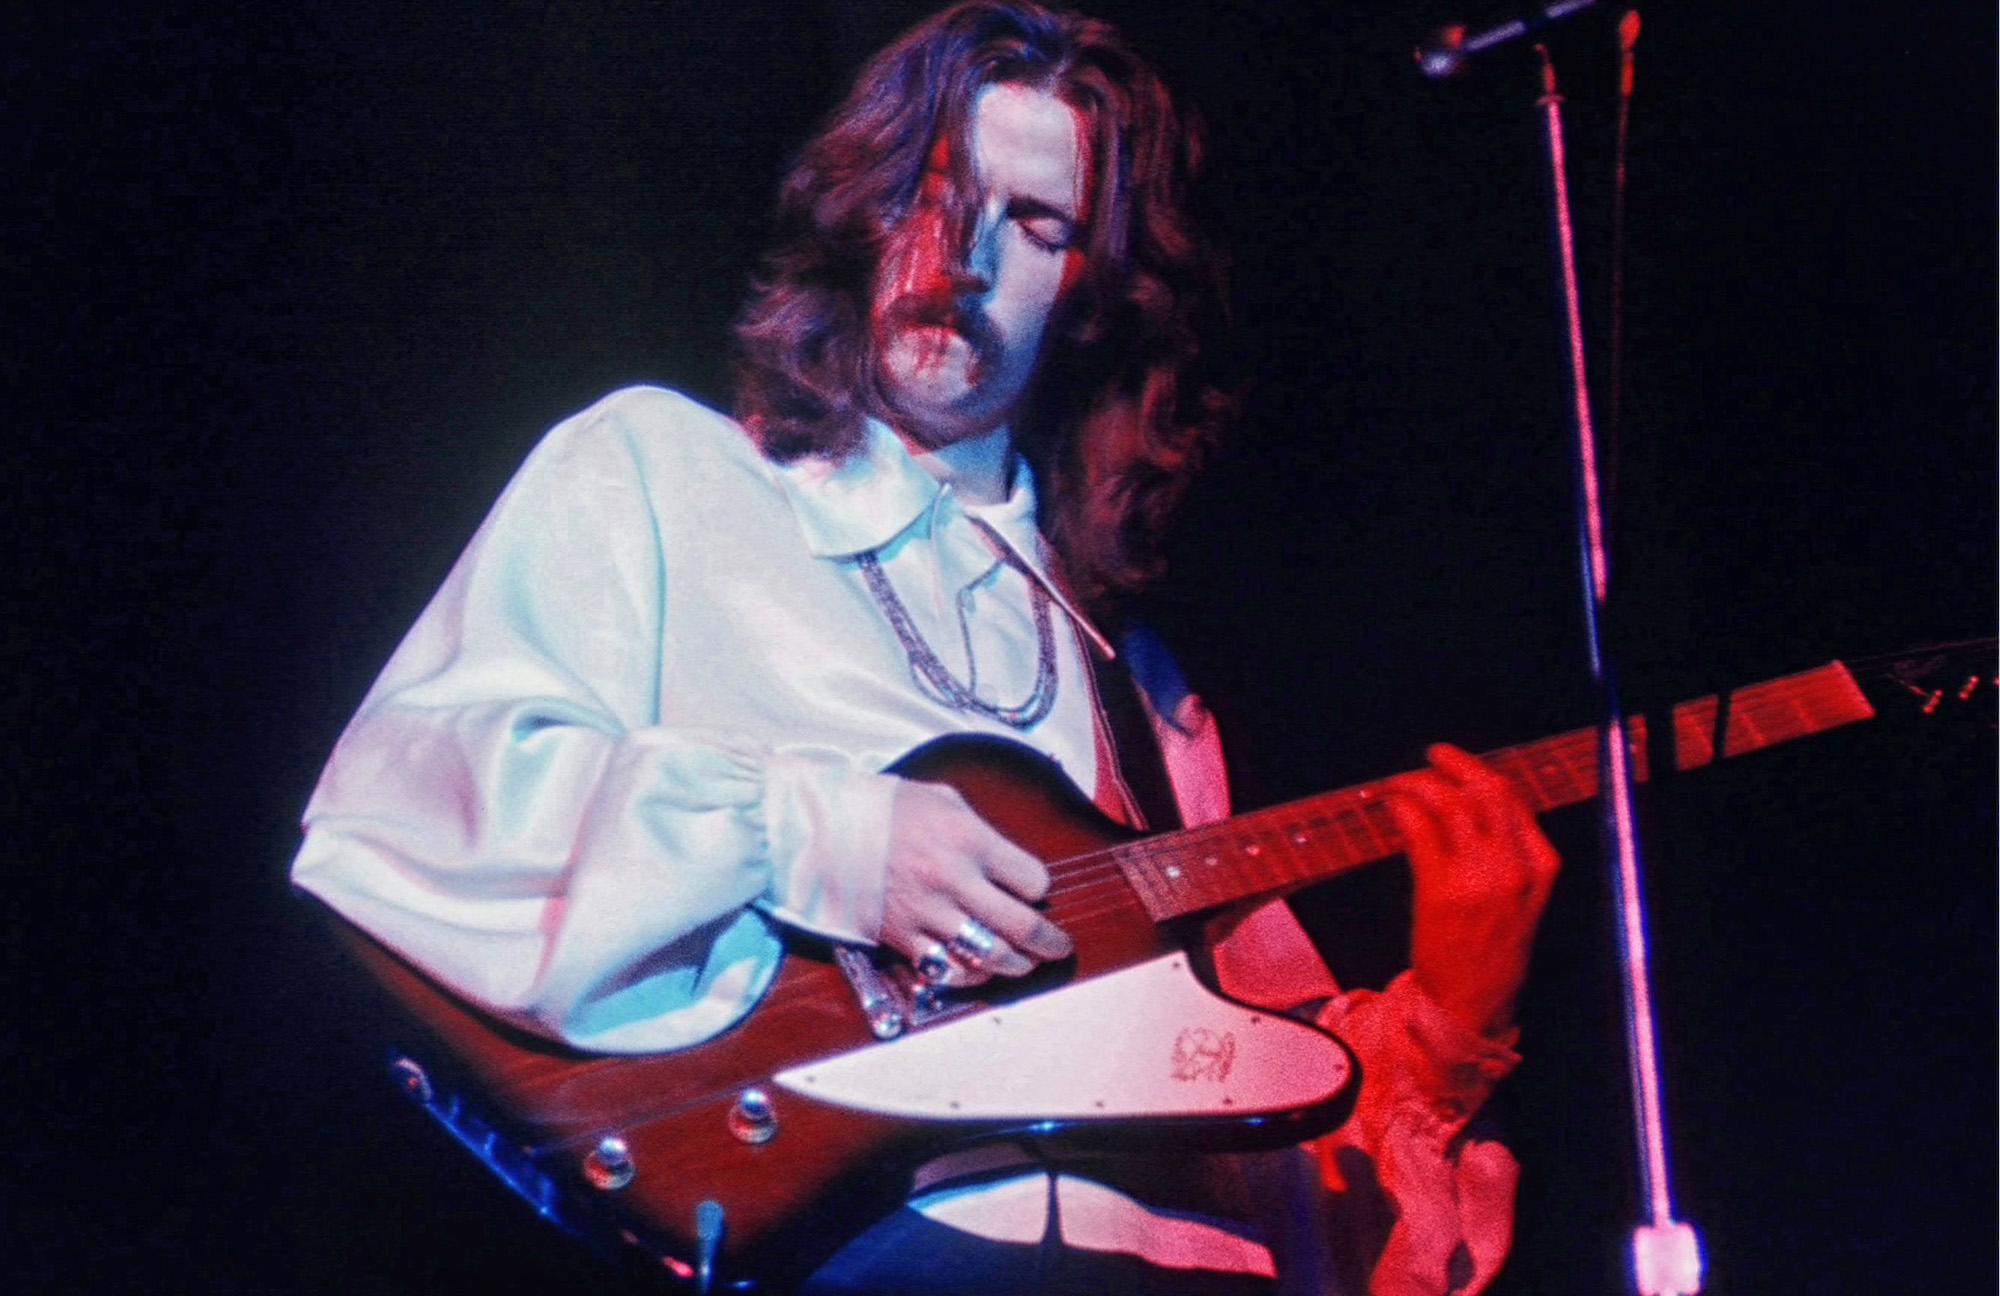 Eric Clapton performs onstage with Cream at The Forum in Inglewood, California in 1968